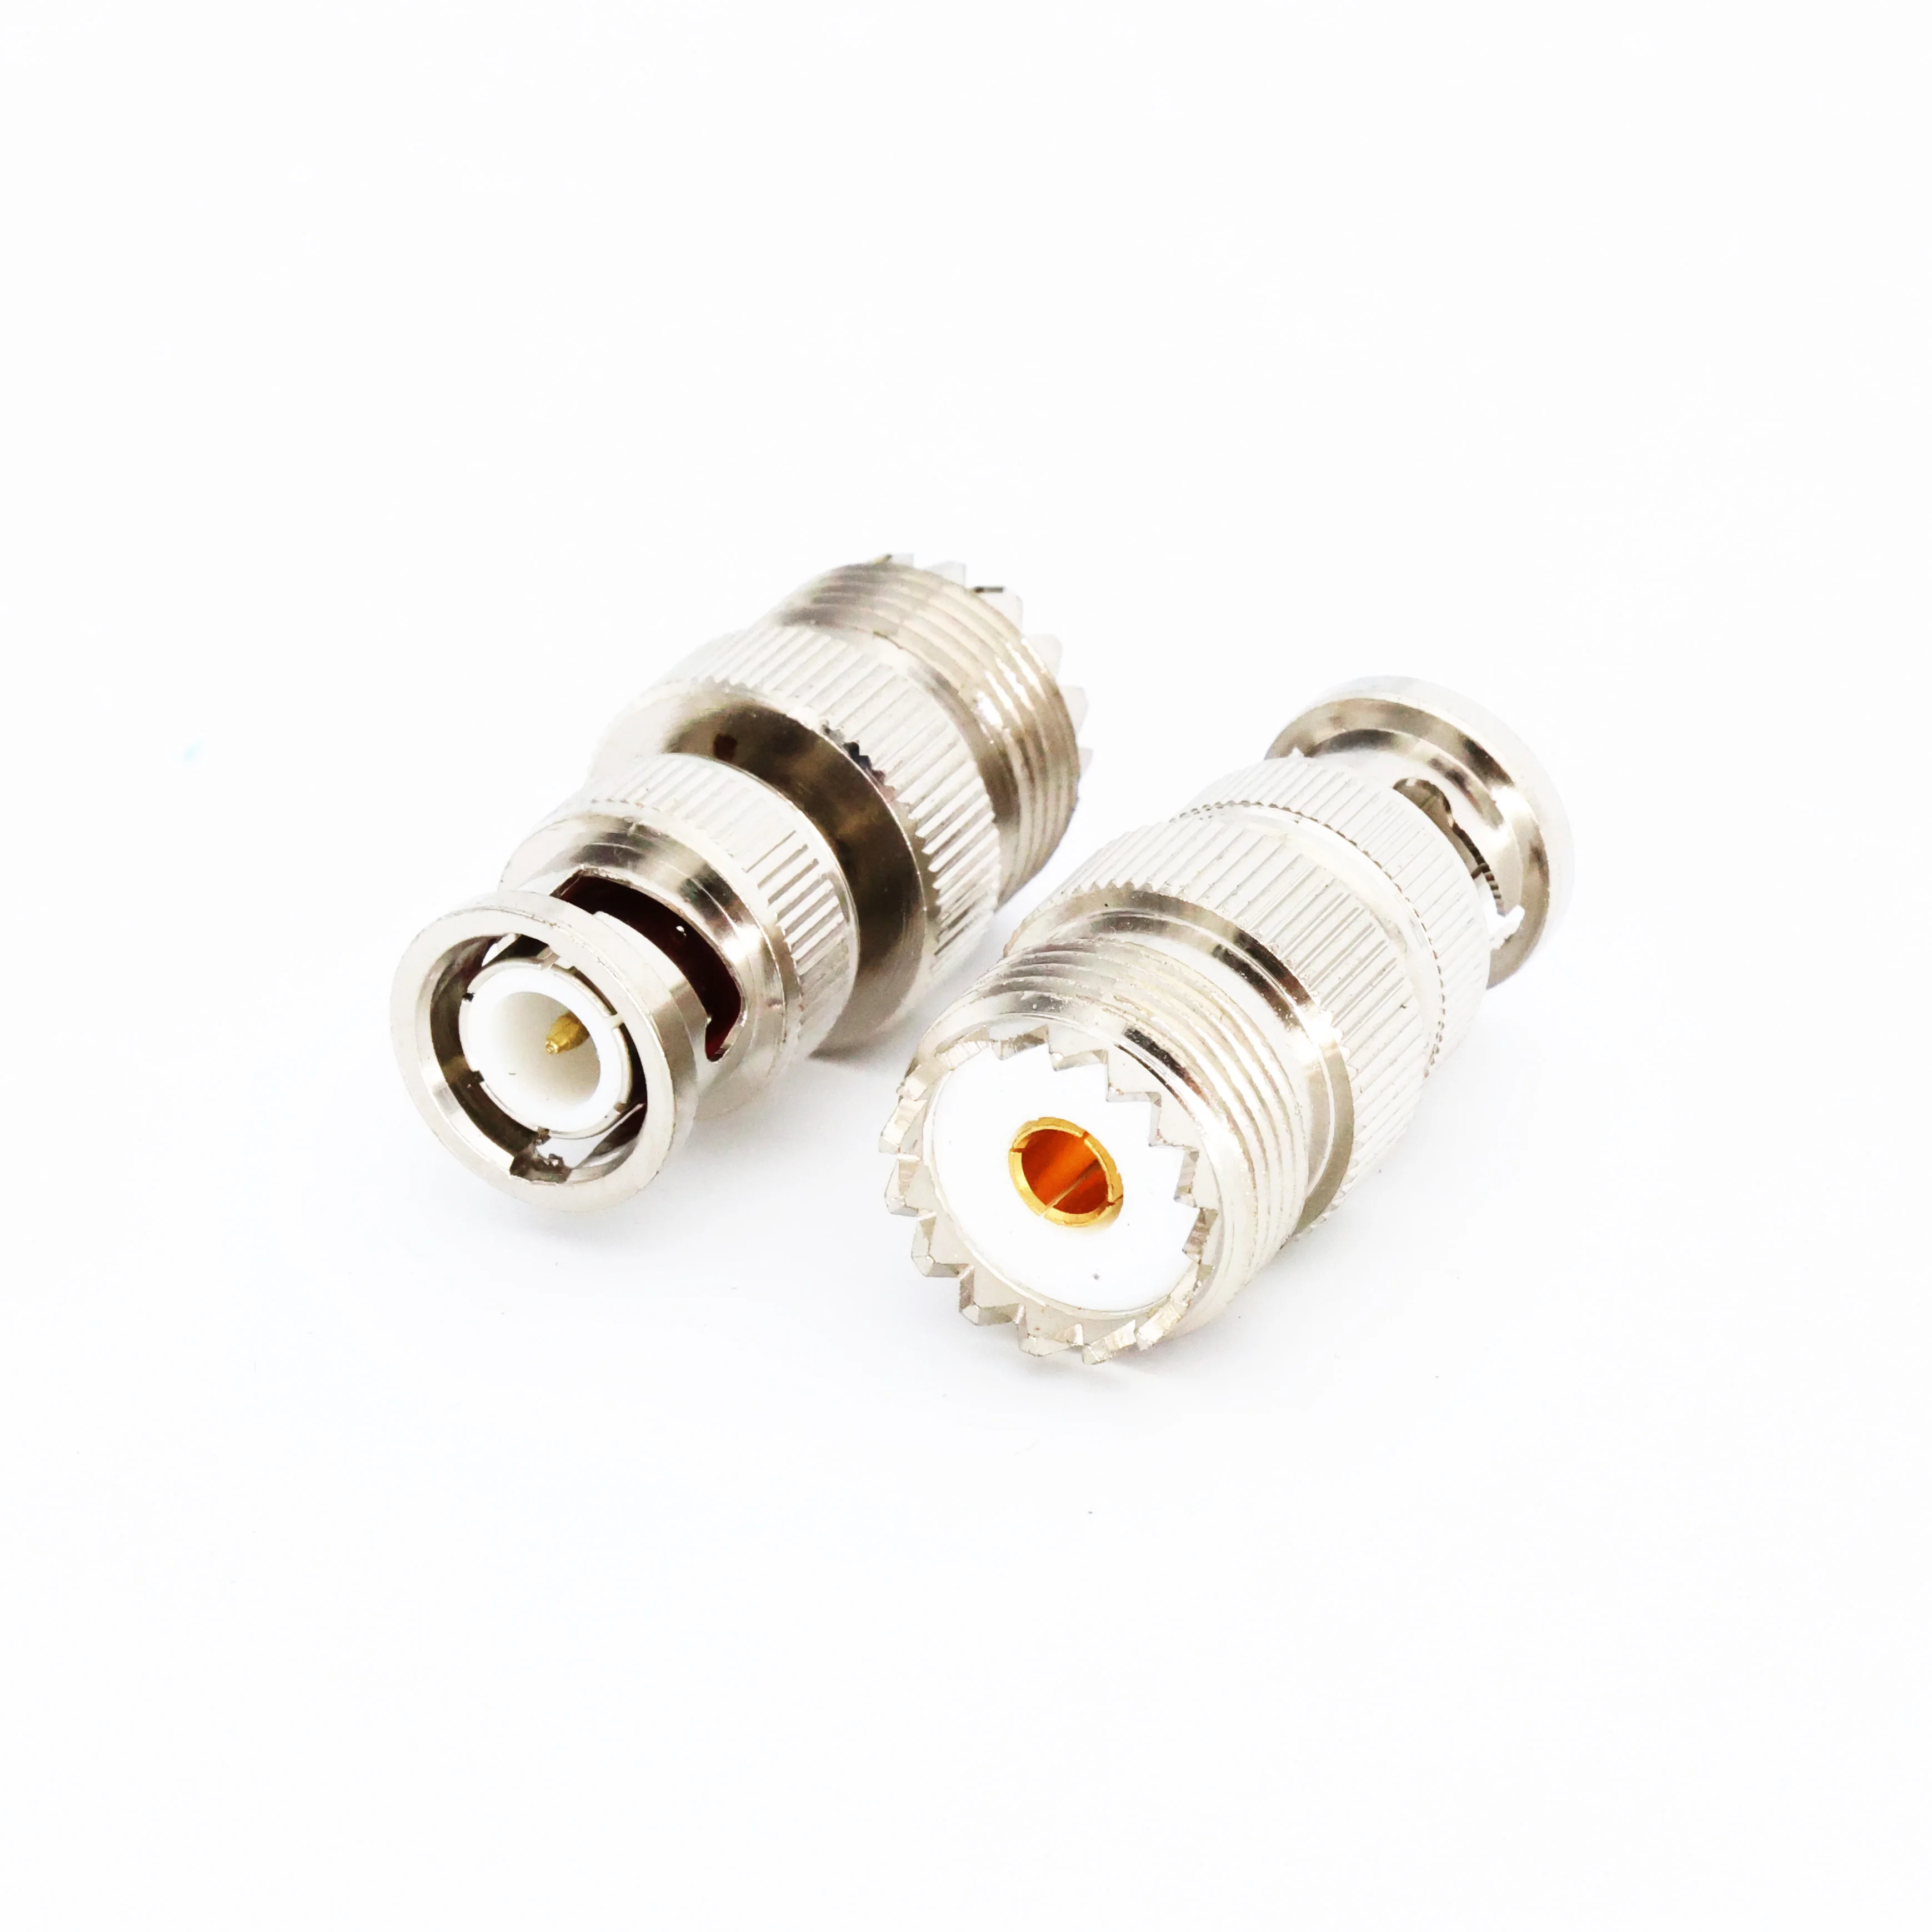 radio arrester ca 35rs coaxial surge protector male to female uhf connector lightning surge protector arrester 2pcs Cleqee BNC Male to UHF SO239 PL-259 Female RF Coaxial Adapter BNC to UHF Coax Jack Connector